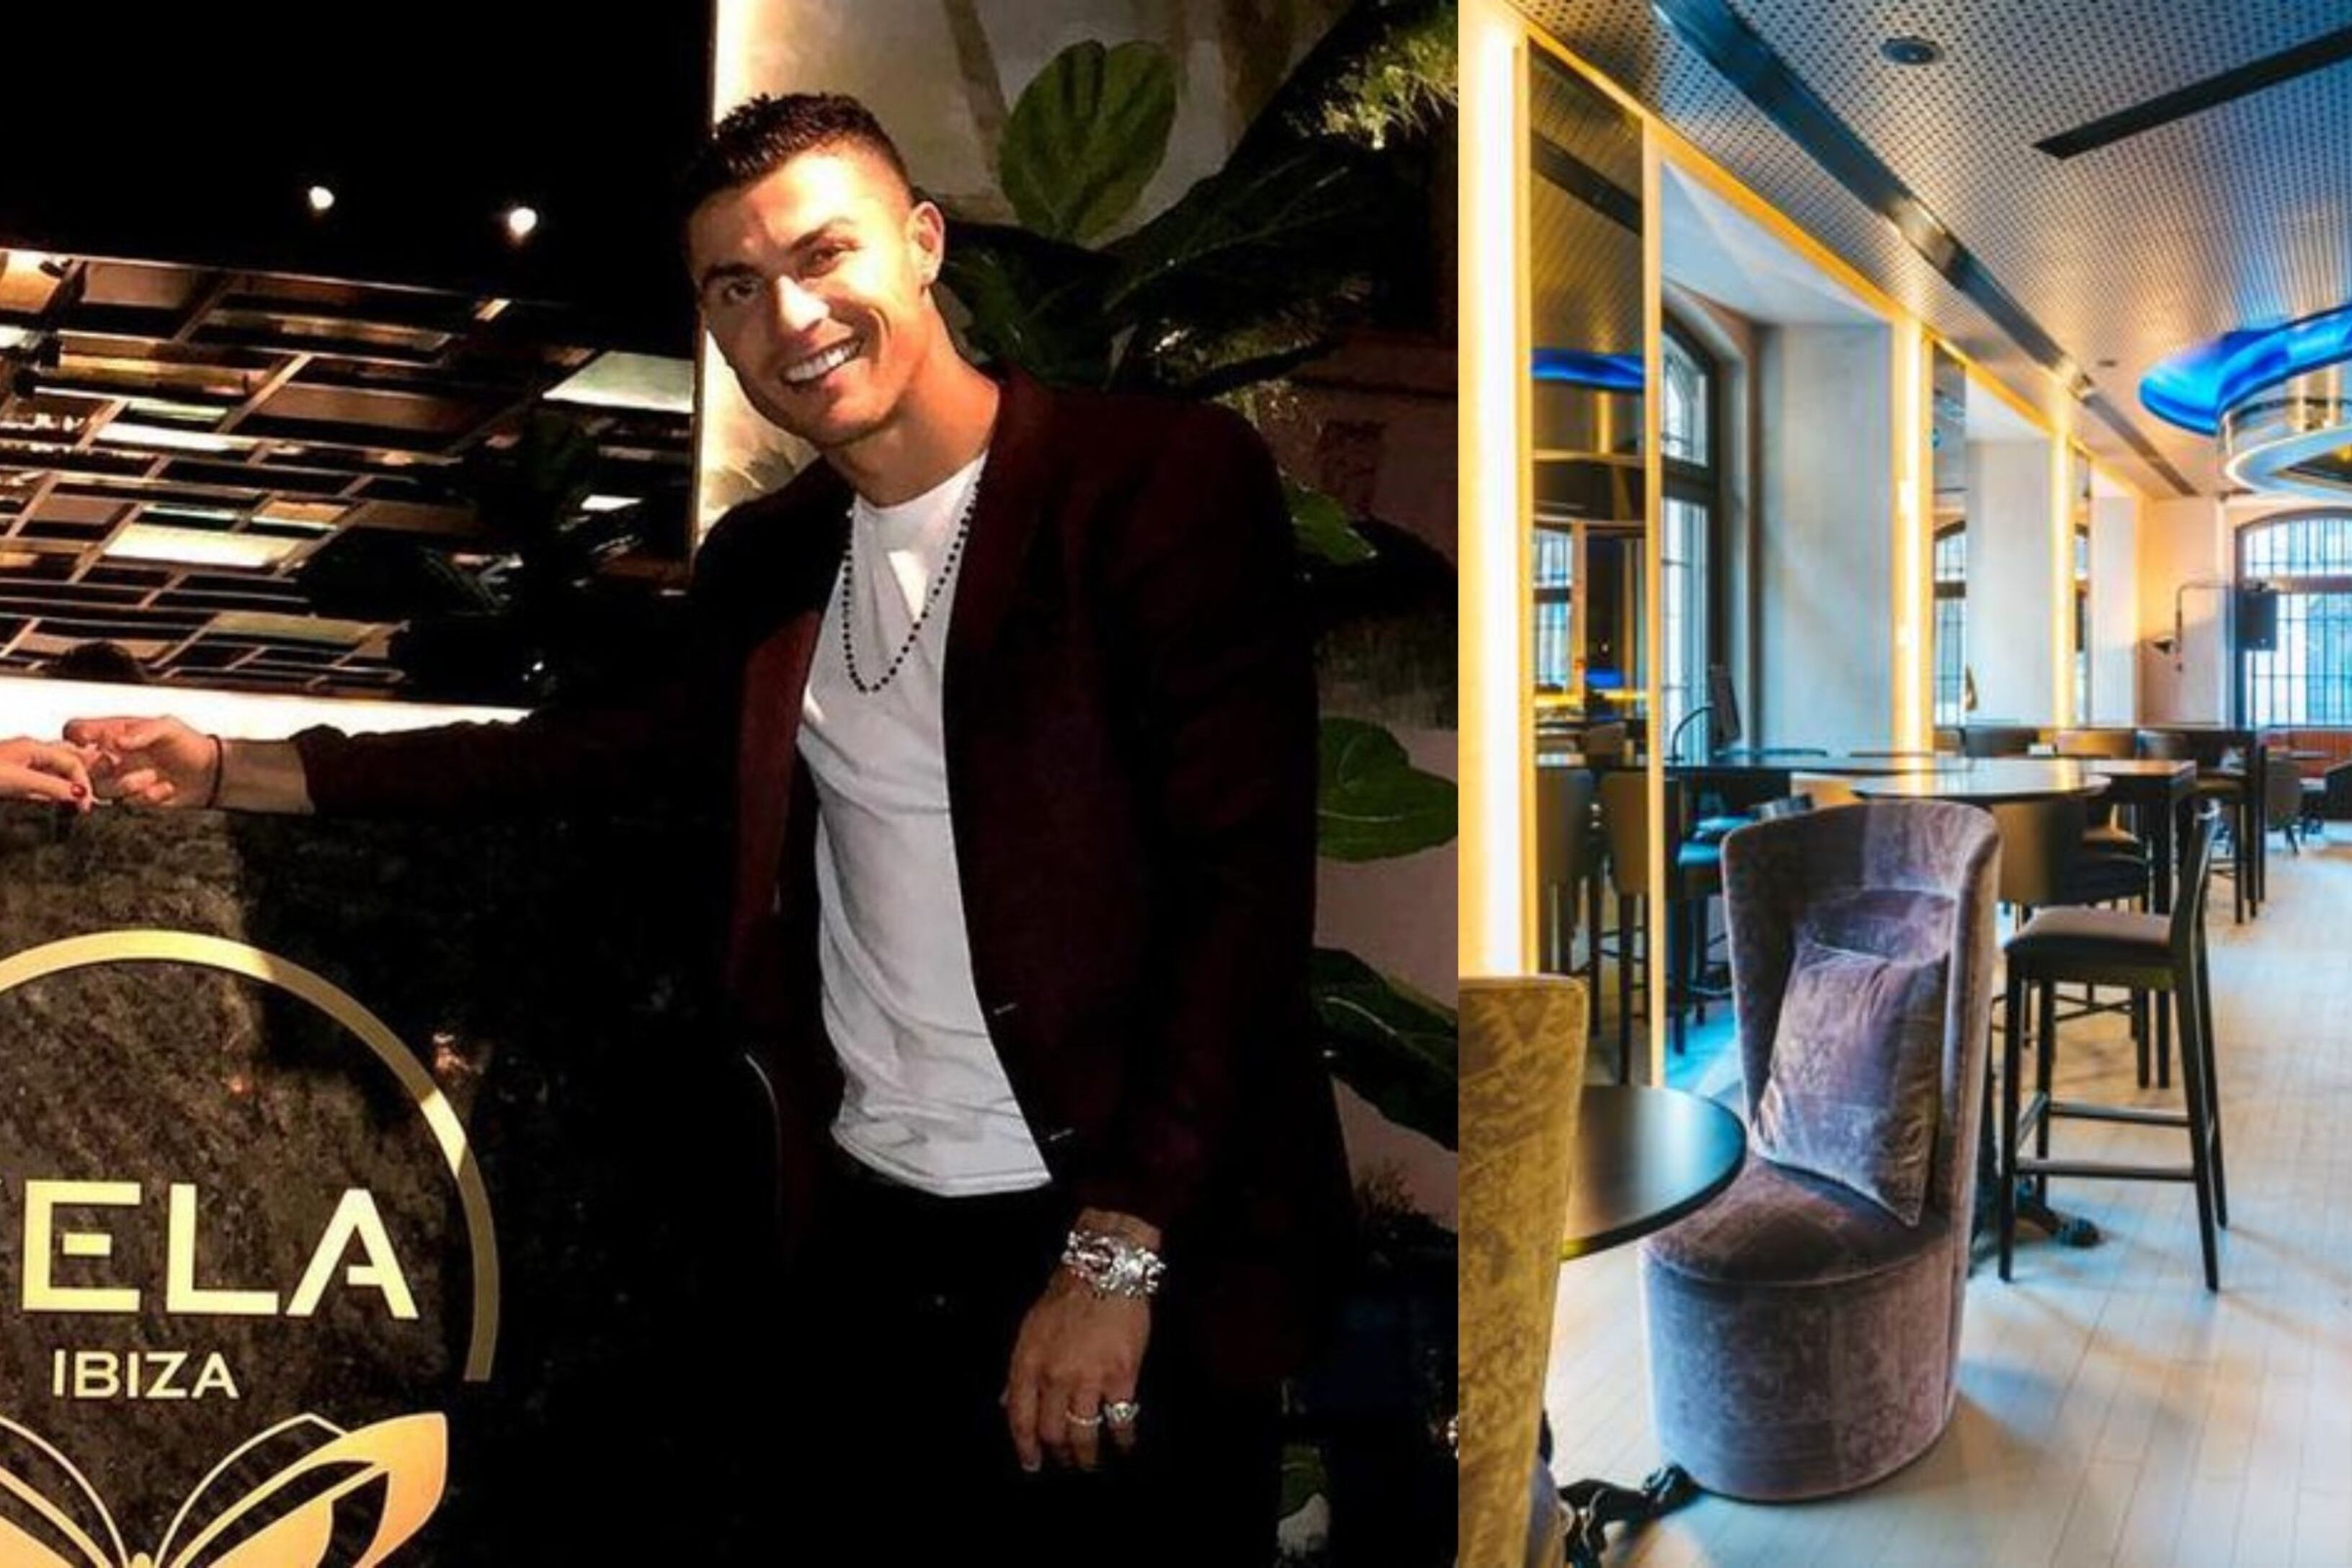 The money that Cristiano Ronaldo earns with his new restaurant in Saudi Arabia